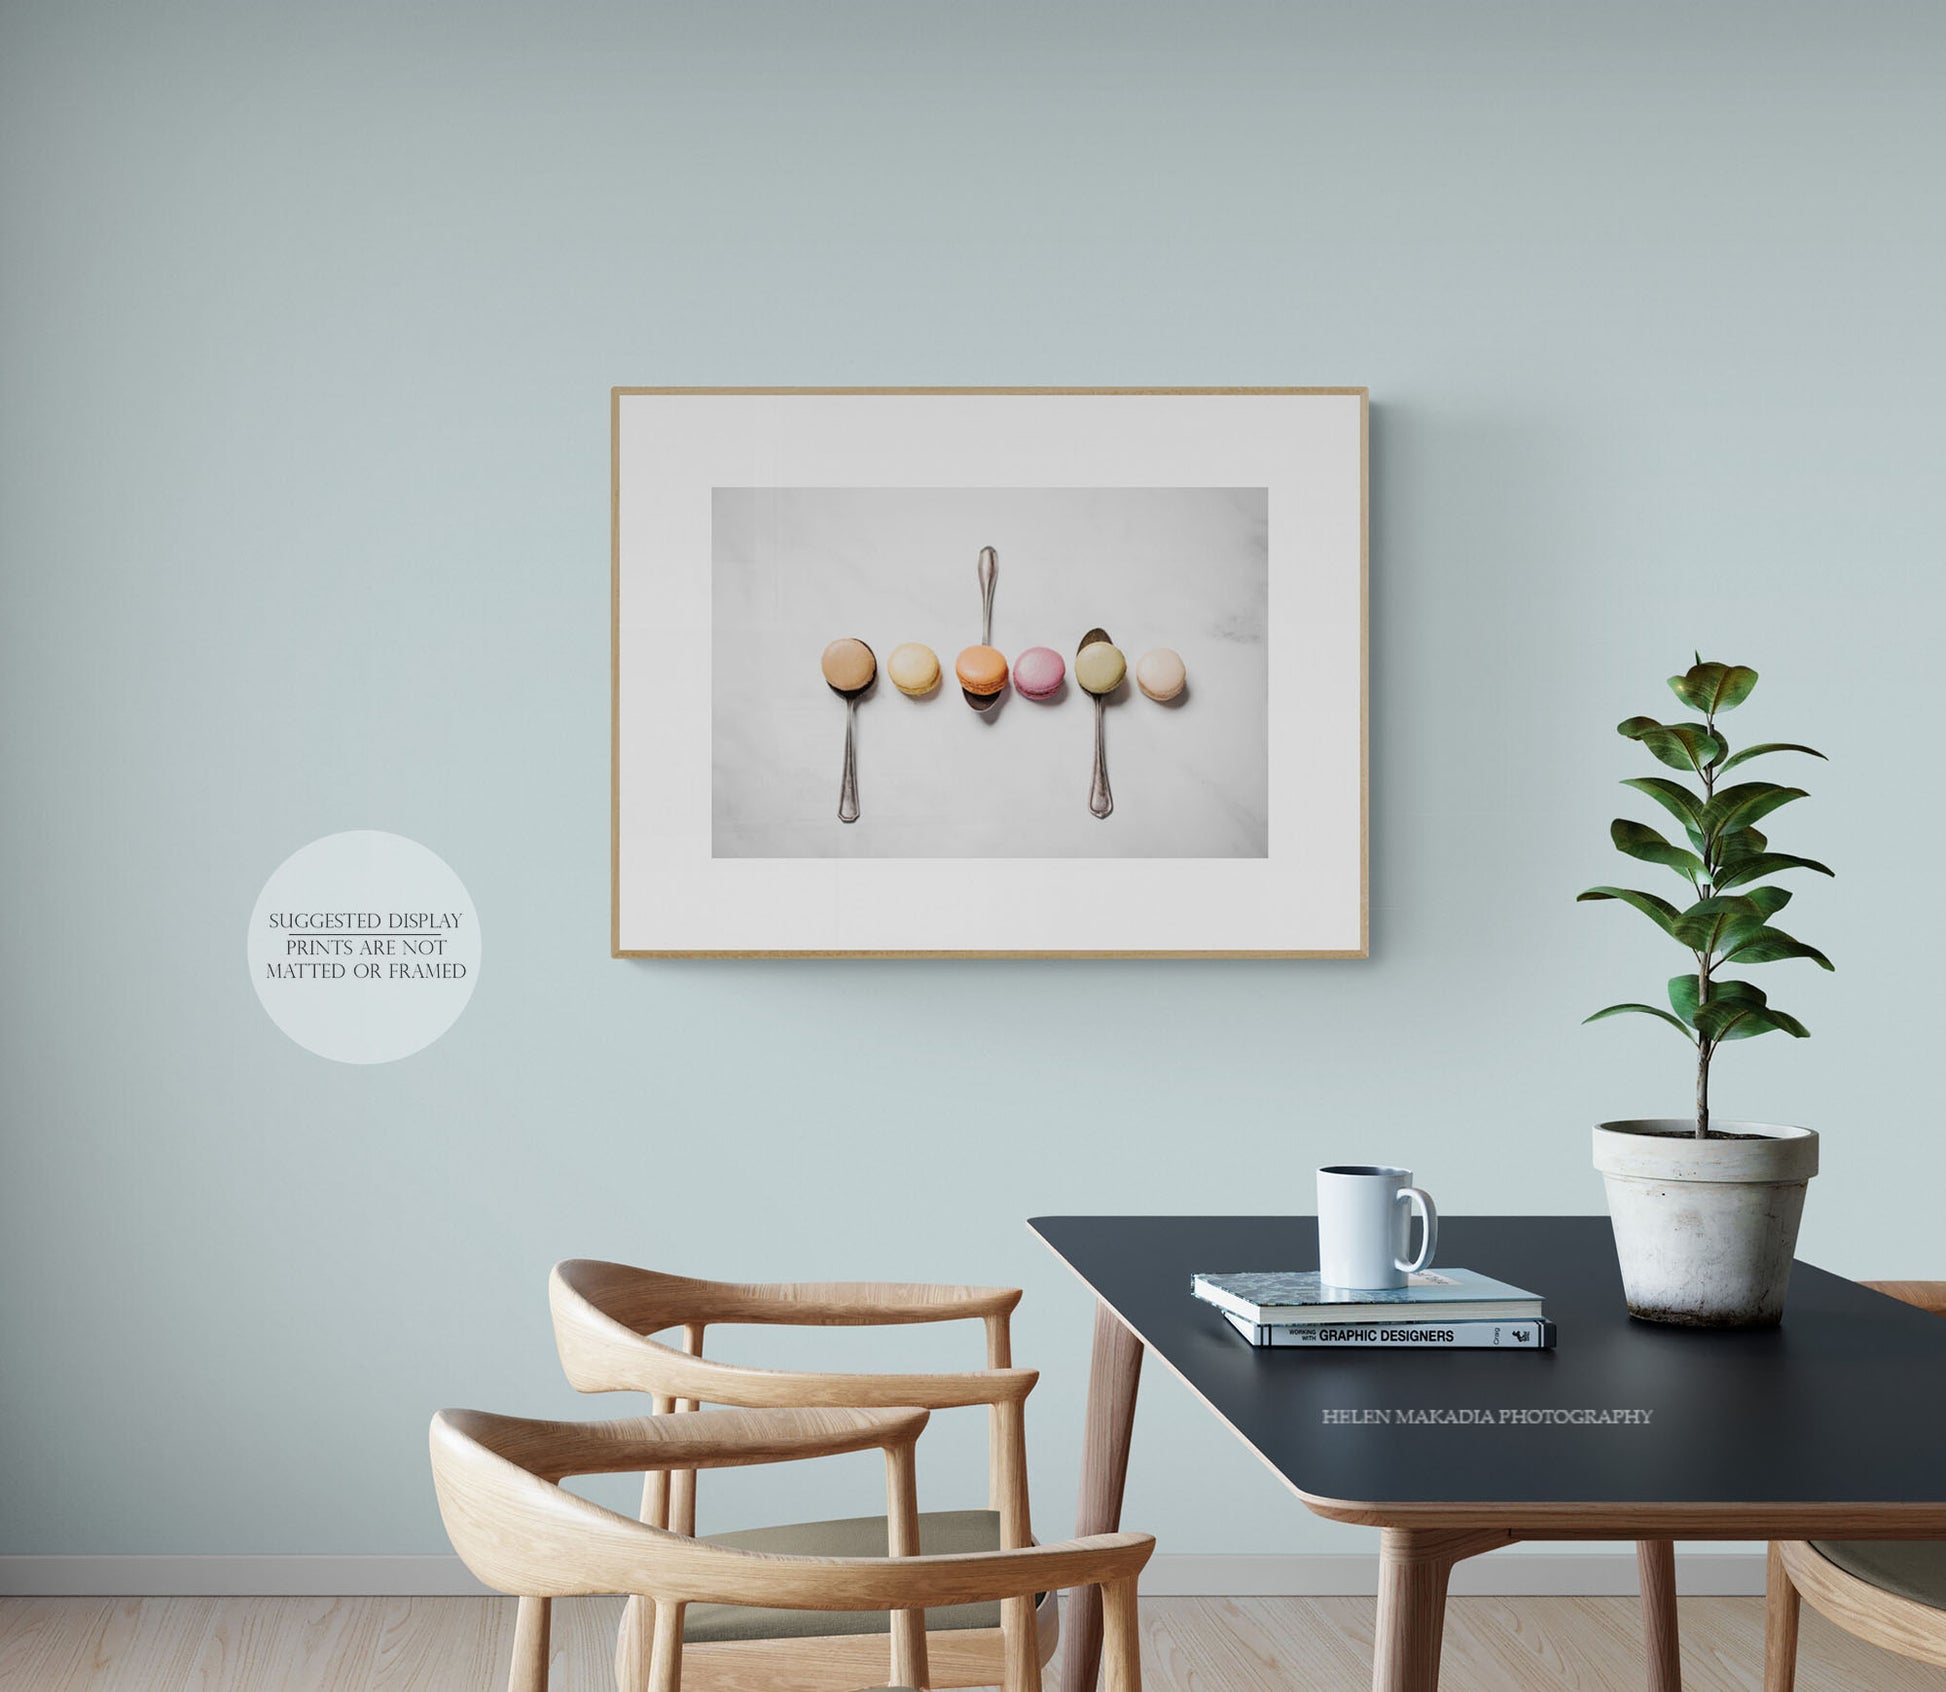 Framed Photograph of Pastel Macarons as Wall Art in a dining room